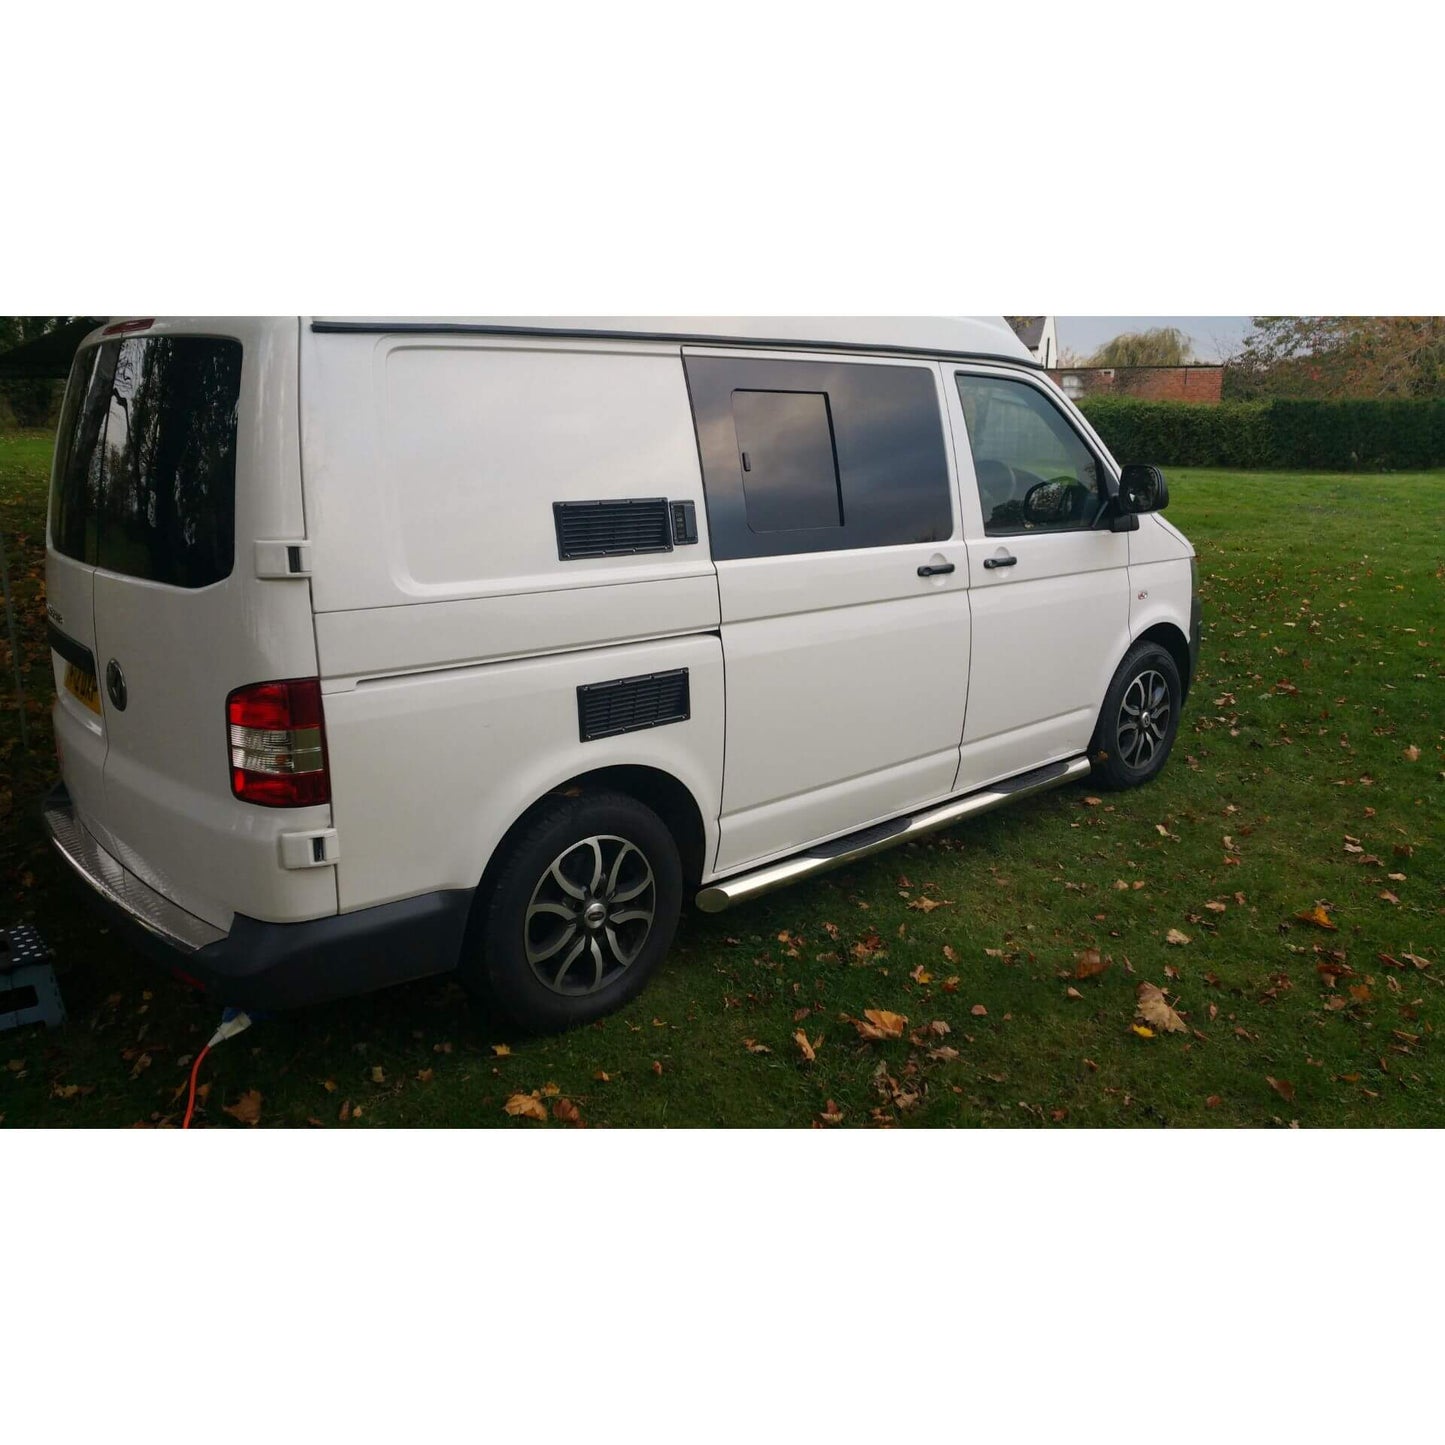 Stainless Steel Side Bars with Step Pads for Volkswagen Transporter T5 SWB -  - sold by Direct4x4